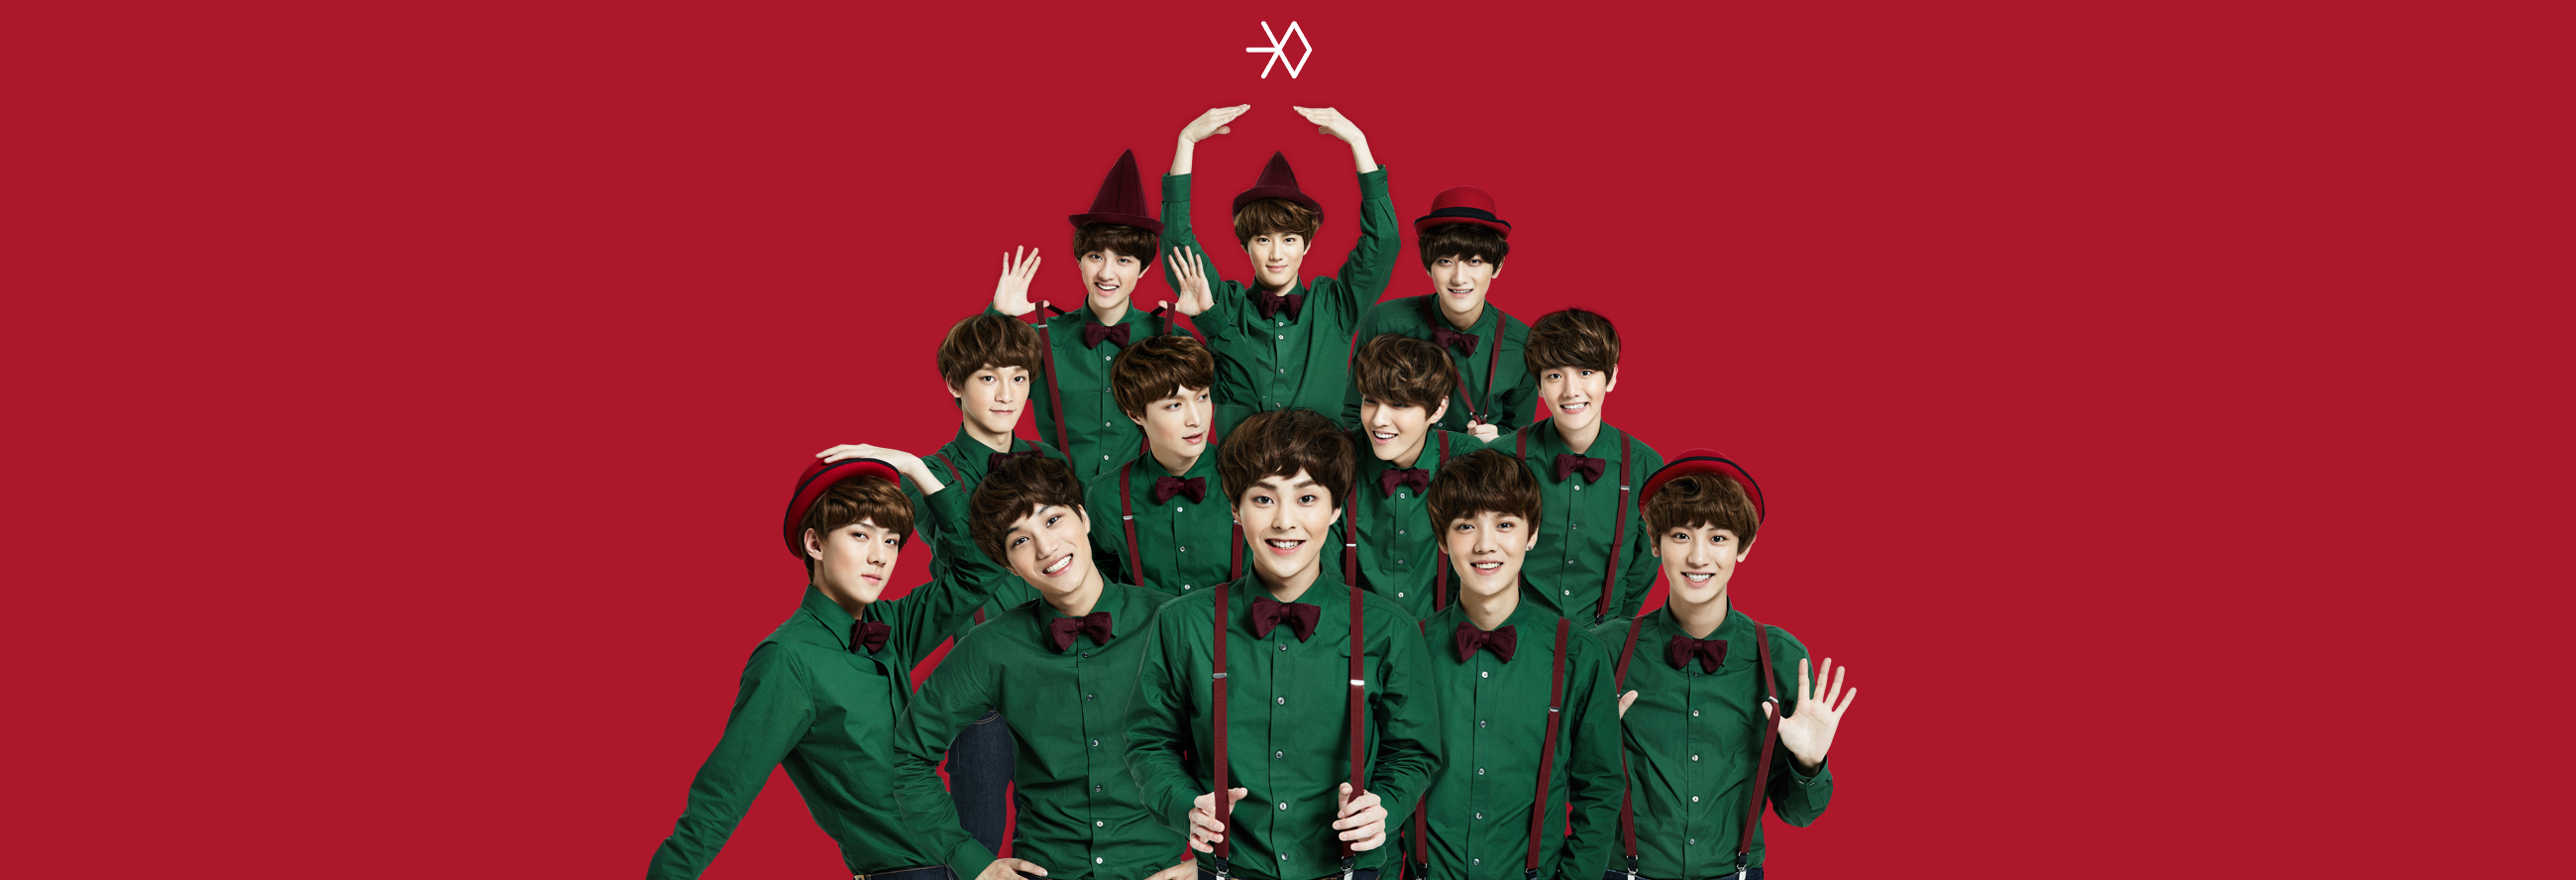 exo 十二月的奇迹 miracles in december background 官网